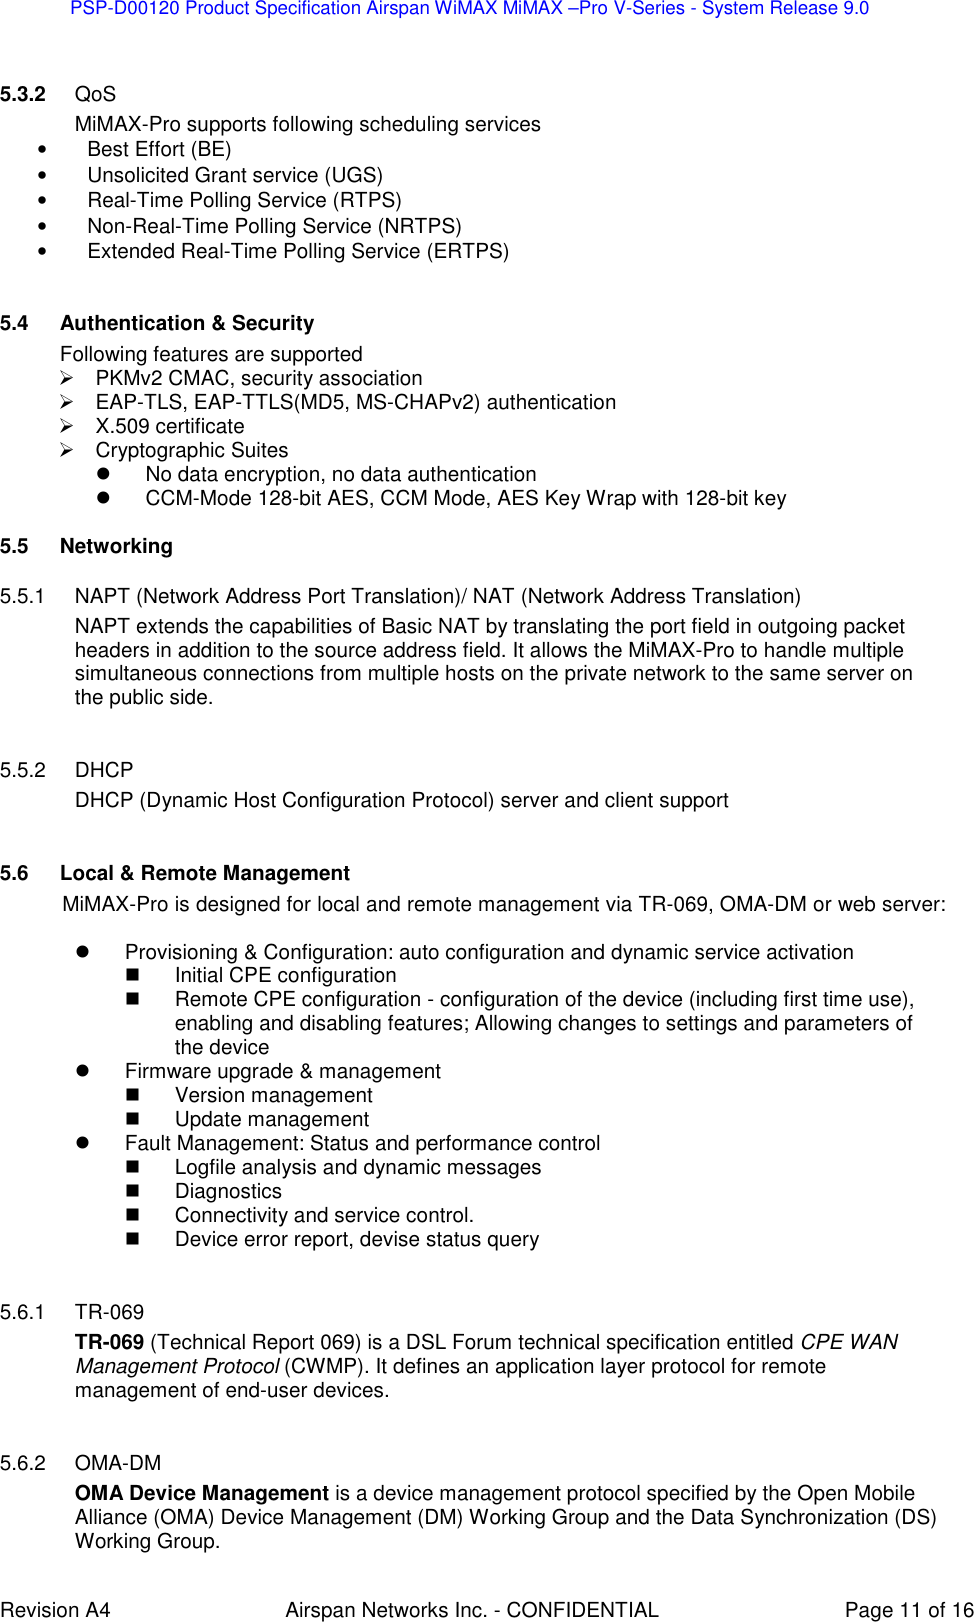 PSP-D00120 Product Specification Airspan WiMAX MiMAX –Pro V-Series - System Release 9.0    Revision A4  Airspan Networks Inc. - CONFIDENTIAL  Page 11 of 16  5.3.2  QoS MiMAX-Pro supports following scheduling services •  Best Effort (BE) •  Unsolicited Grant service (UGS) •  Real-Time Polling Service (RTPS) •  Non-Real-Time Polling Service (NRTPS) •  Extended Real-Time Polling Service (ERTPS)  5.4  Authentication &amp; Security Following features are supported   PKMv2 CMAC, security association   EAP-TLS, EAP-TTLS(MD5, MS-CHAPv2) authentication   X.509 certificate   Cryptographic Suites   No data encryption, no data authentication    CCM-Mode 128-bit AES, CCM Mode, AES Key Wrap with 128-bit key 5.5  Networking  5.5.1  NAPT (Network Address Port Translation)/ NAT (Network Address Translation) NAPT extends the capabilities of Basic NAT by translating the port field in outgoing packet headers in addition to the source address field. It allows the MiMAX-Pro to handle multiple simultaneous connections from multiple hosts on the private network to the same server on the public side.  5.5.2  DHCP DHCP (Dynamic Host Configuration Protocol) server and client support  5.6  Local &amp; Remote Management MiMAX-Pro is designed for local and remote management via TR-069, OMA-DM or web server:    Provisioning &amp; Configuration: auto configuration and dynamic service activation    Initial CPE configuration   Remote CPE configuration - configuration of the device (including first time use), enabling and disabling features; Allowing changes to settings and parameters of the device   Firmware upgrade &amp; management    Version management   Update management   Fault Management: Status and performance control    Logfile analysis and dynamic messages   Diagnostics   Connectivity and service control.   Device error report, devise status query  5.6.1  TR-069 TR-069 (Technical Report 069) is a DSL Forum technical specification entitled CPE WAN Management Protocol (CWMP). It defines an application layer protocol for remote management of end-user devices.  5.6.2  OMA-DM OMA Device Management is a device management protocol specified by the Open Mobile Alliance (OMA) Device Management (DM) Working Group and the Data Synchronization (DS) Working Group.  